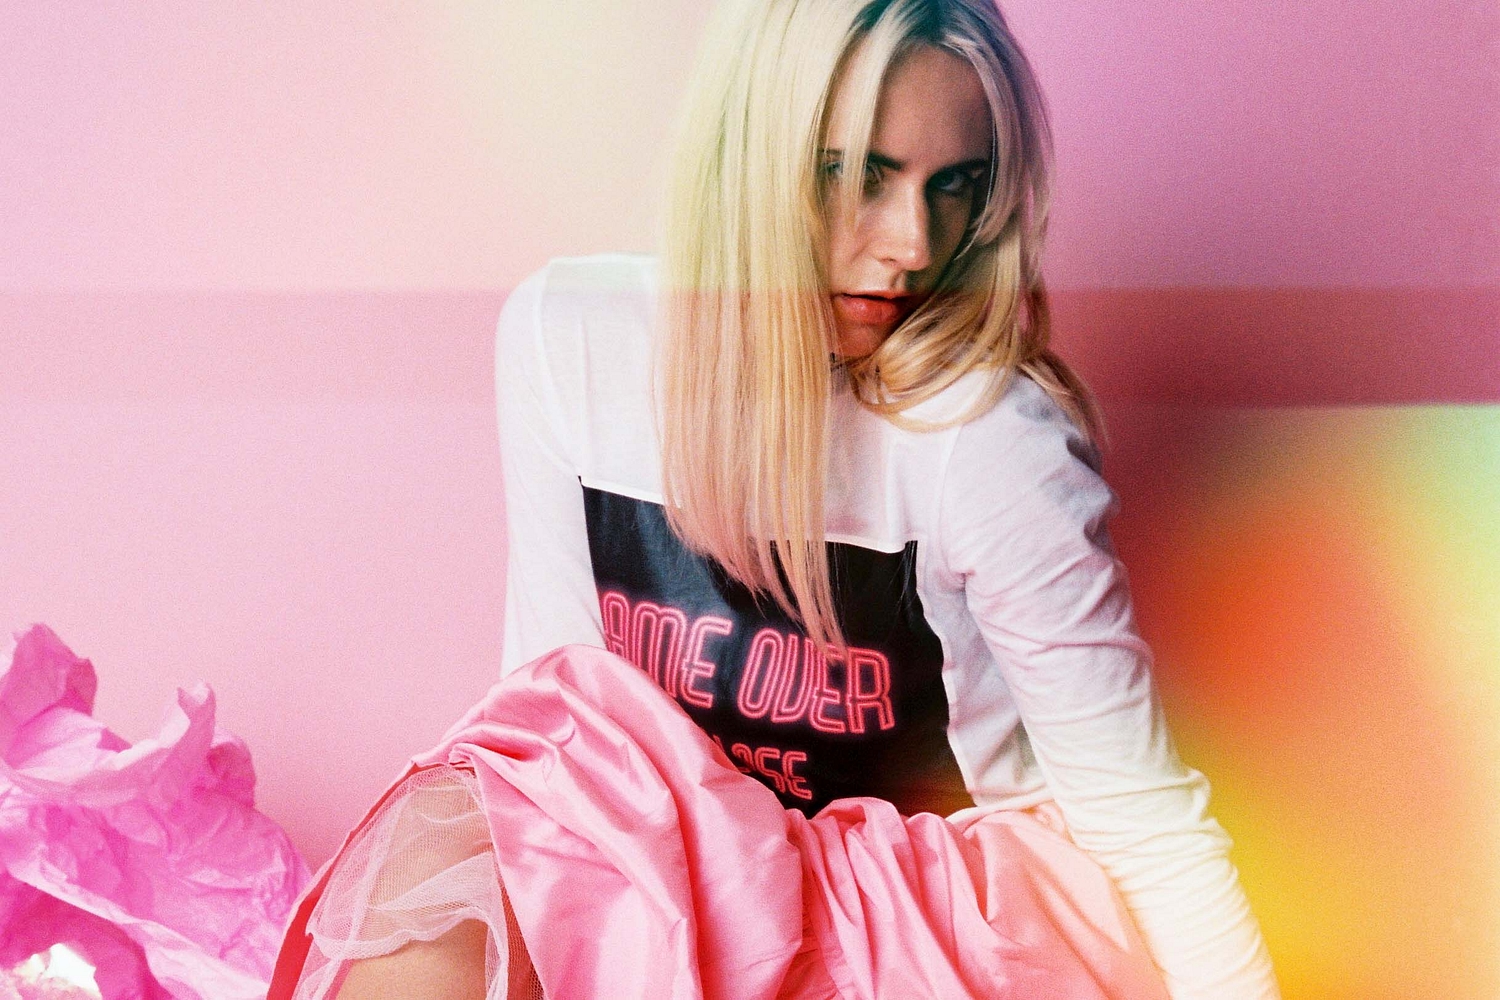 MØ drops ‘Drum’, co-written with Charli XCX and BloodPop